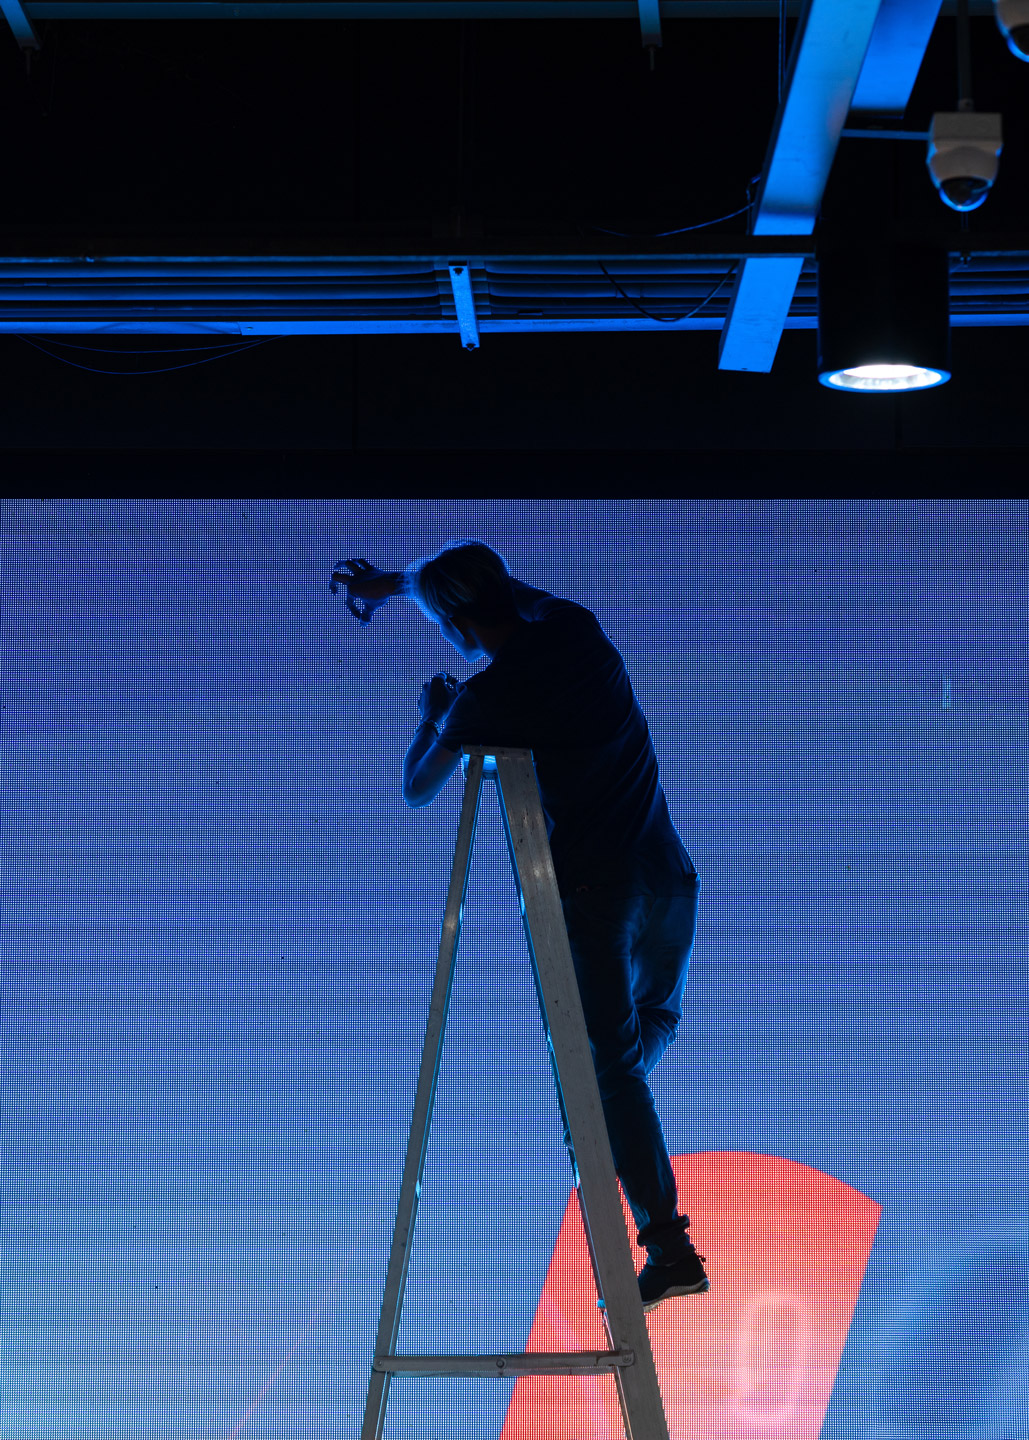 A technician working on an LED wall